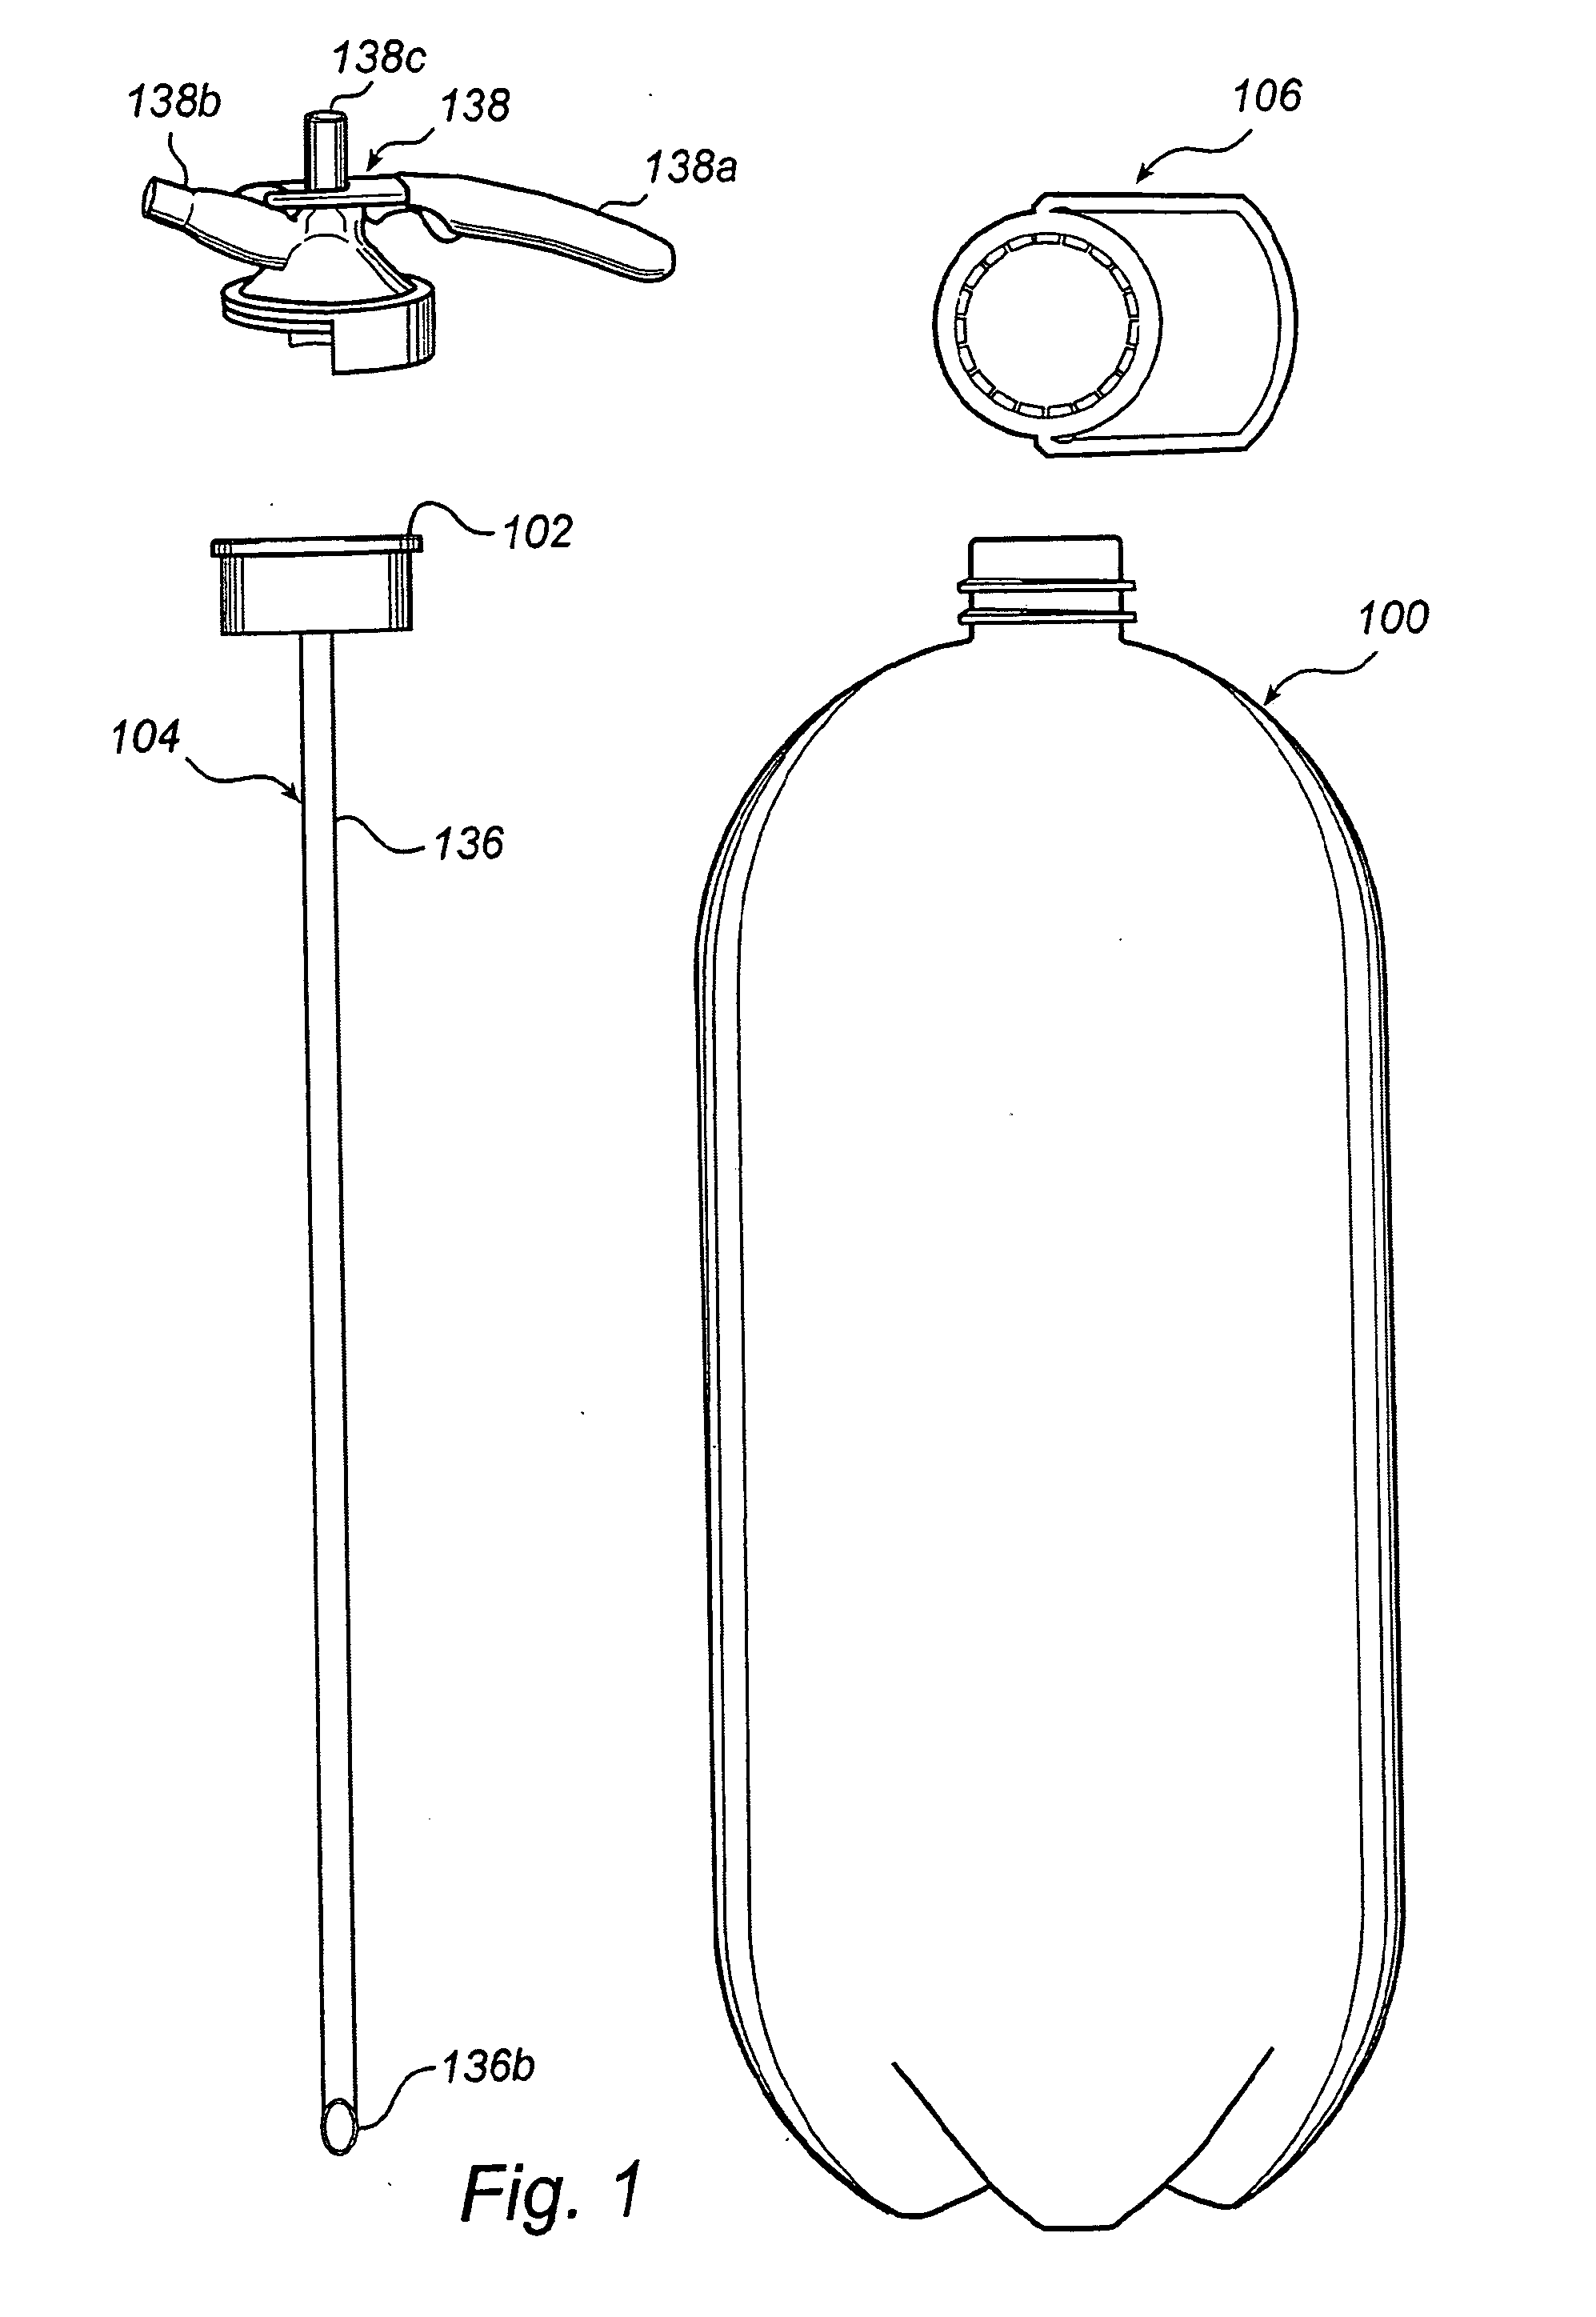 System and Method for Distribution and Dispensing of Beverages